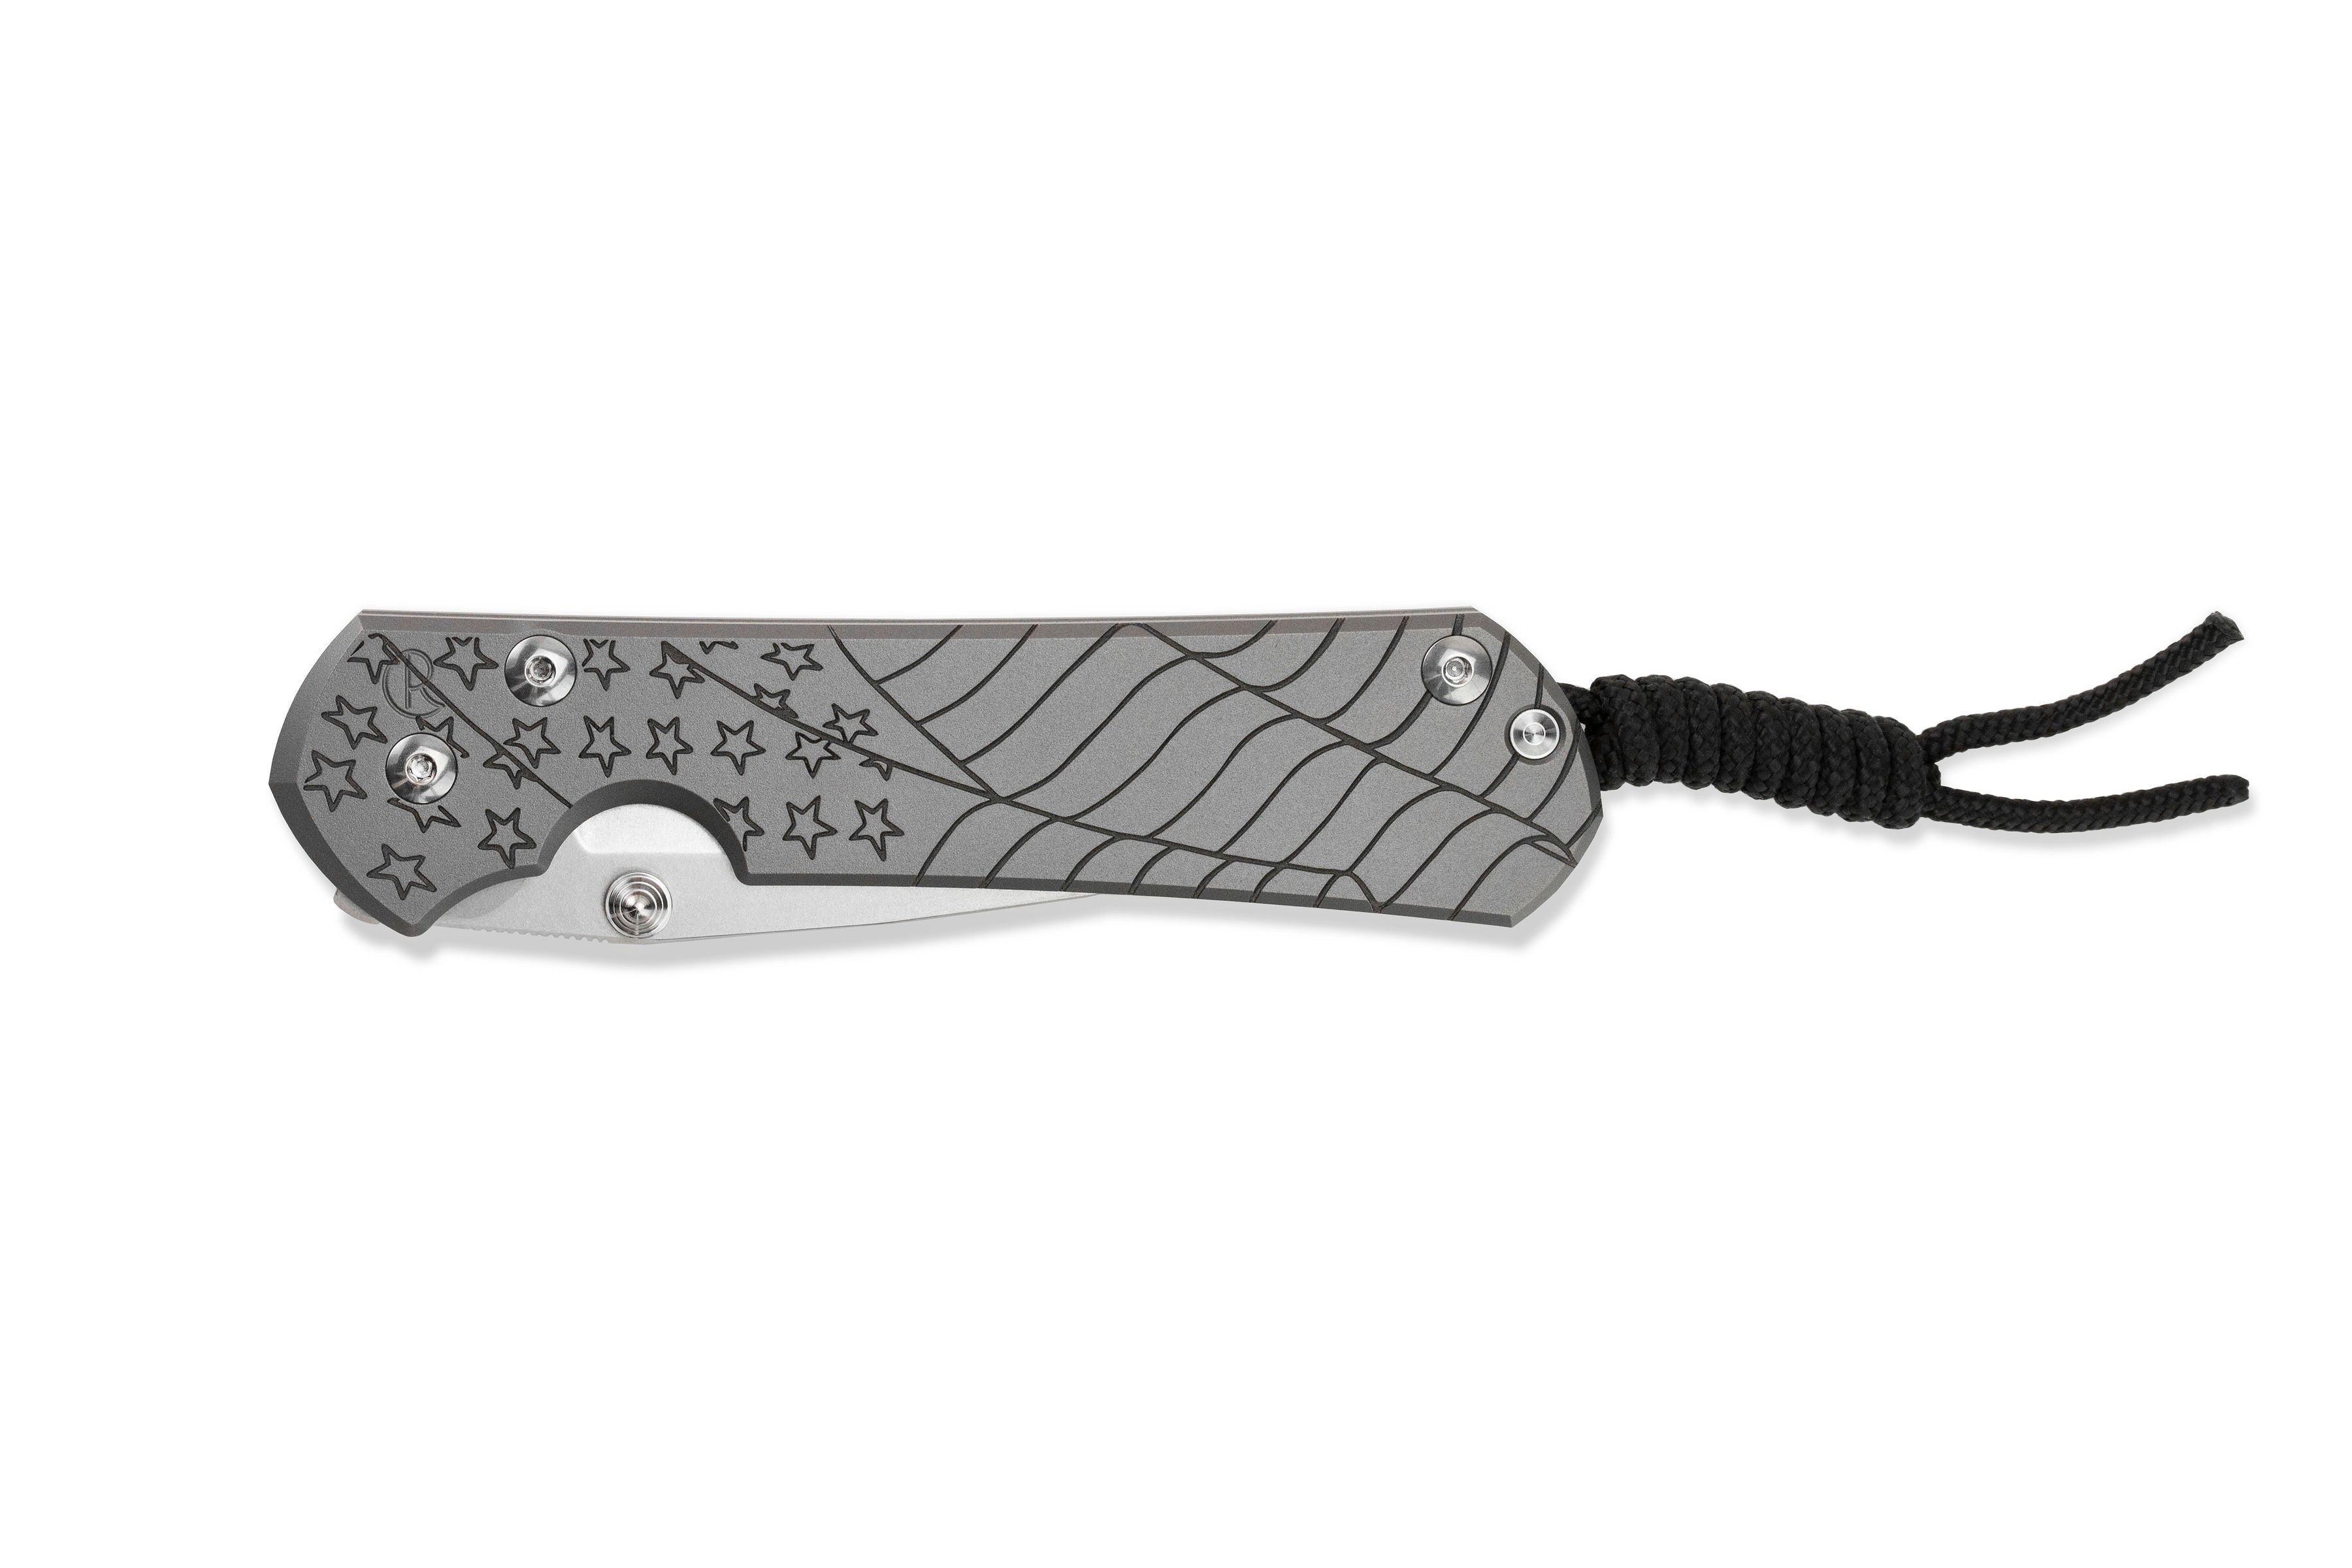 Chris Reeve - Large Sebenza 31 - 2022 CGG "Forever Flag" - Drop Point - Glass Blasted - L31-1690